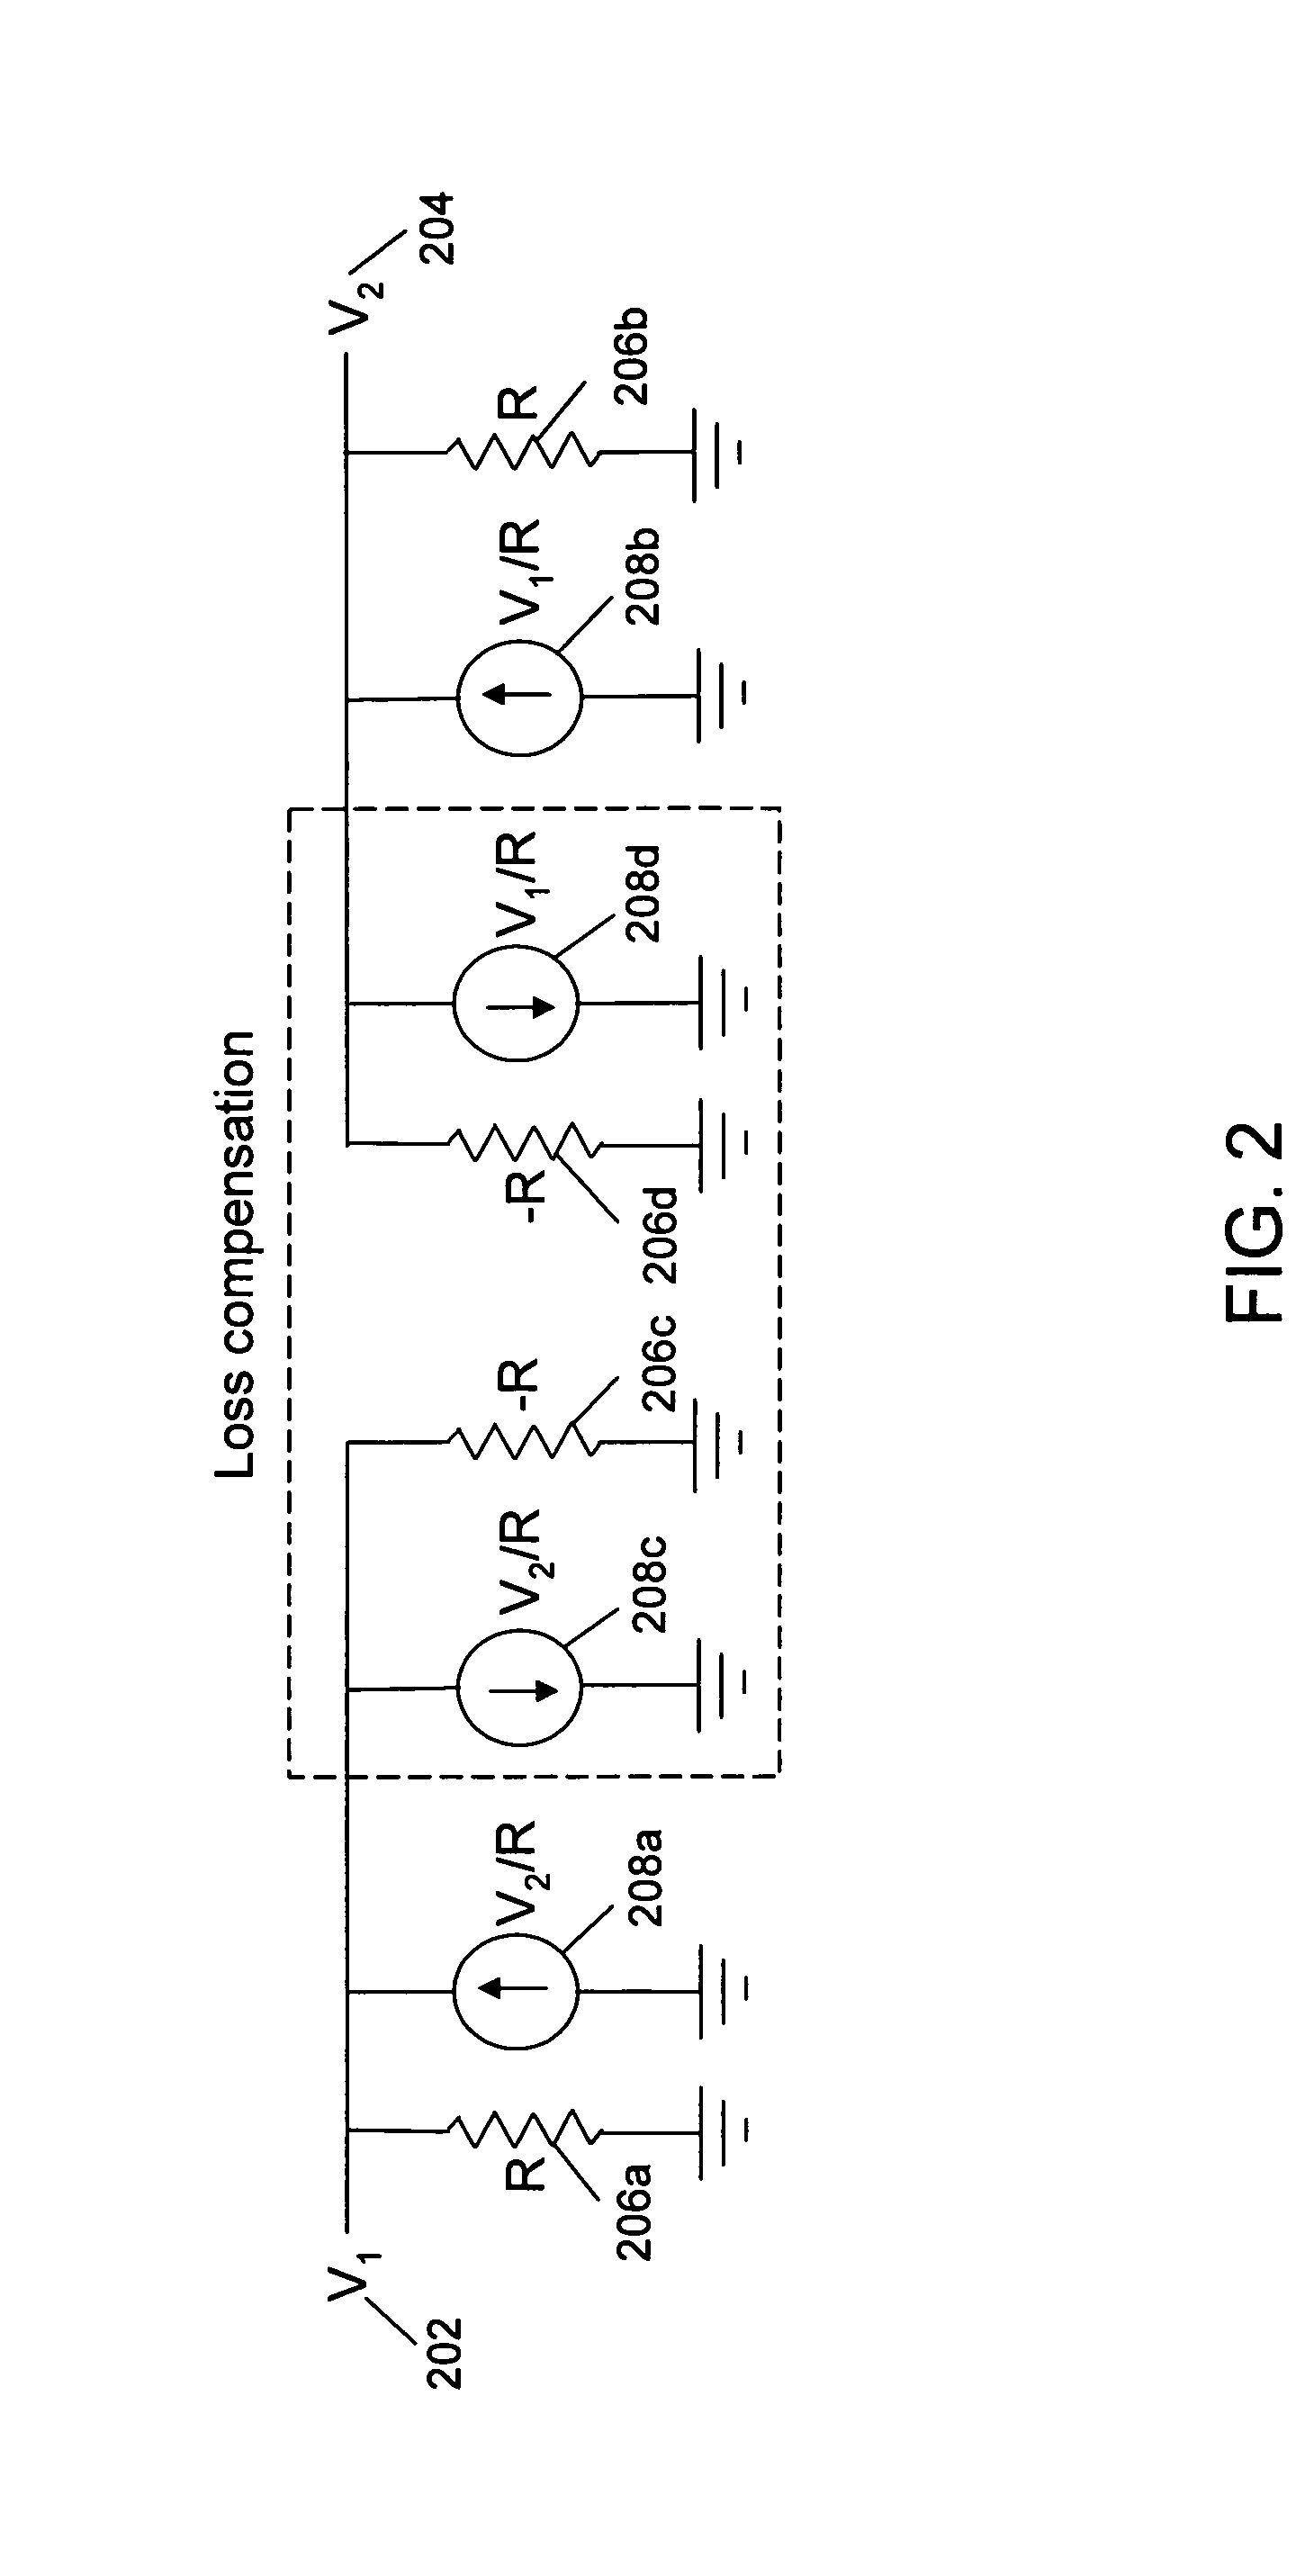 Tunable balanced loss compensation in an electronic filter